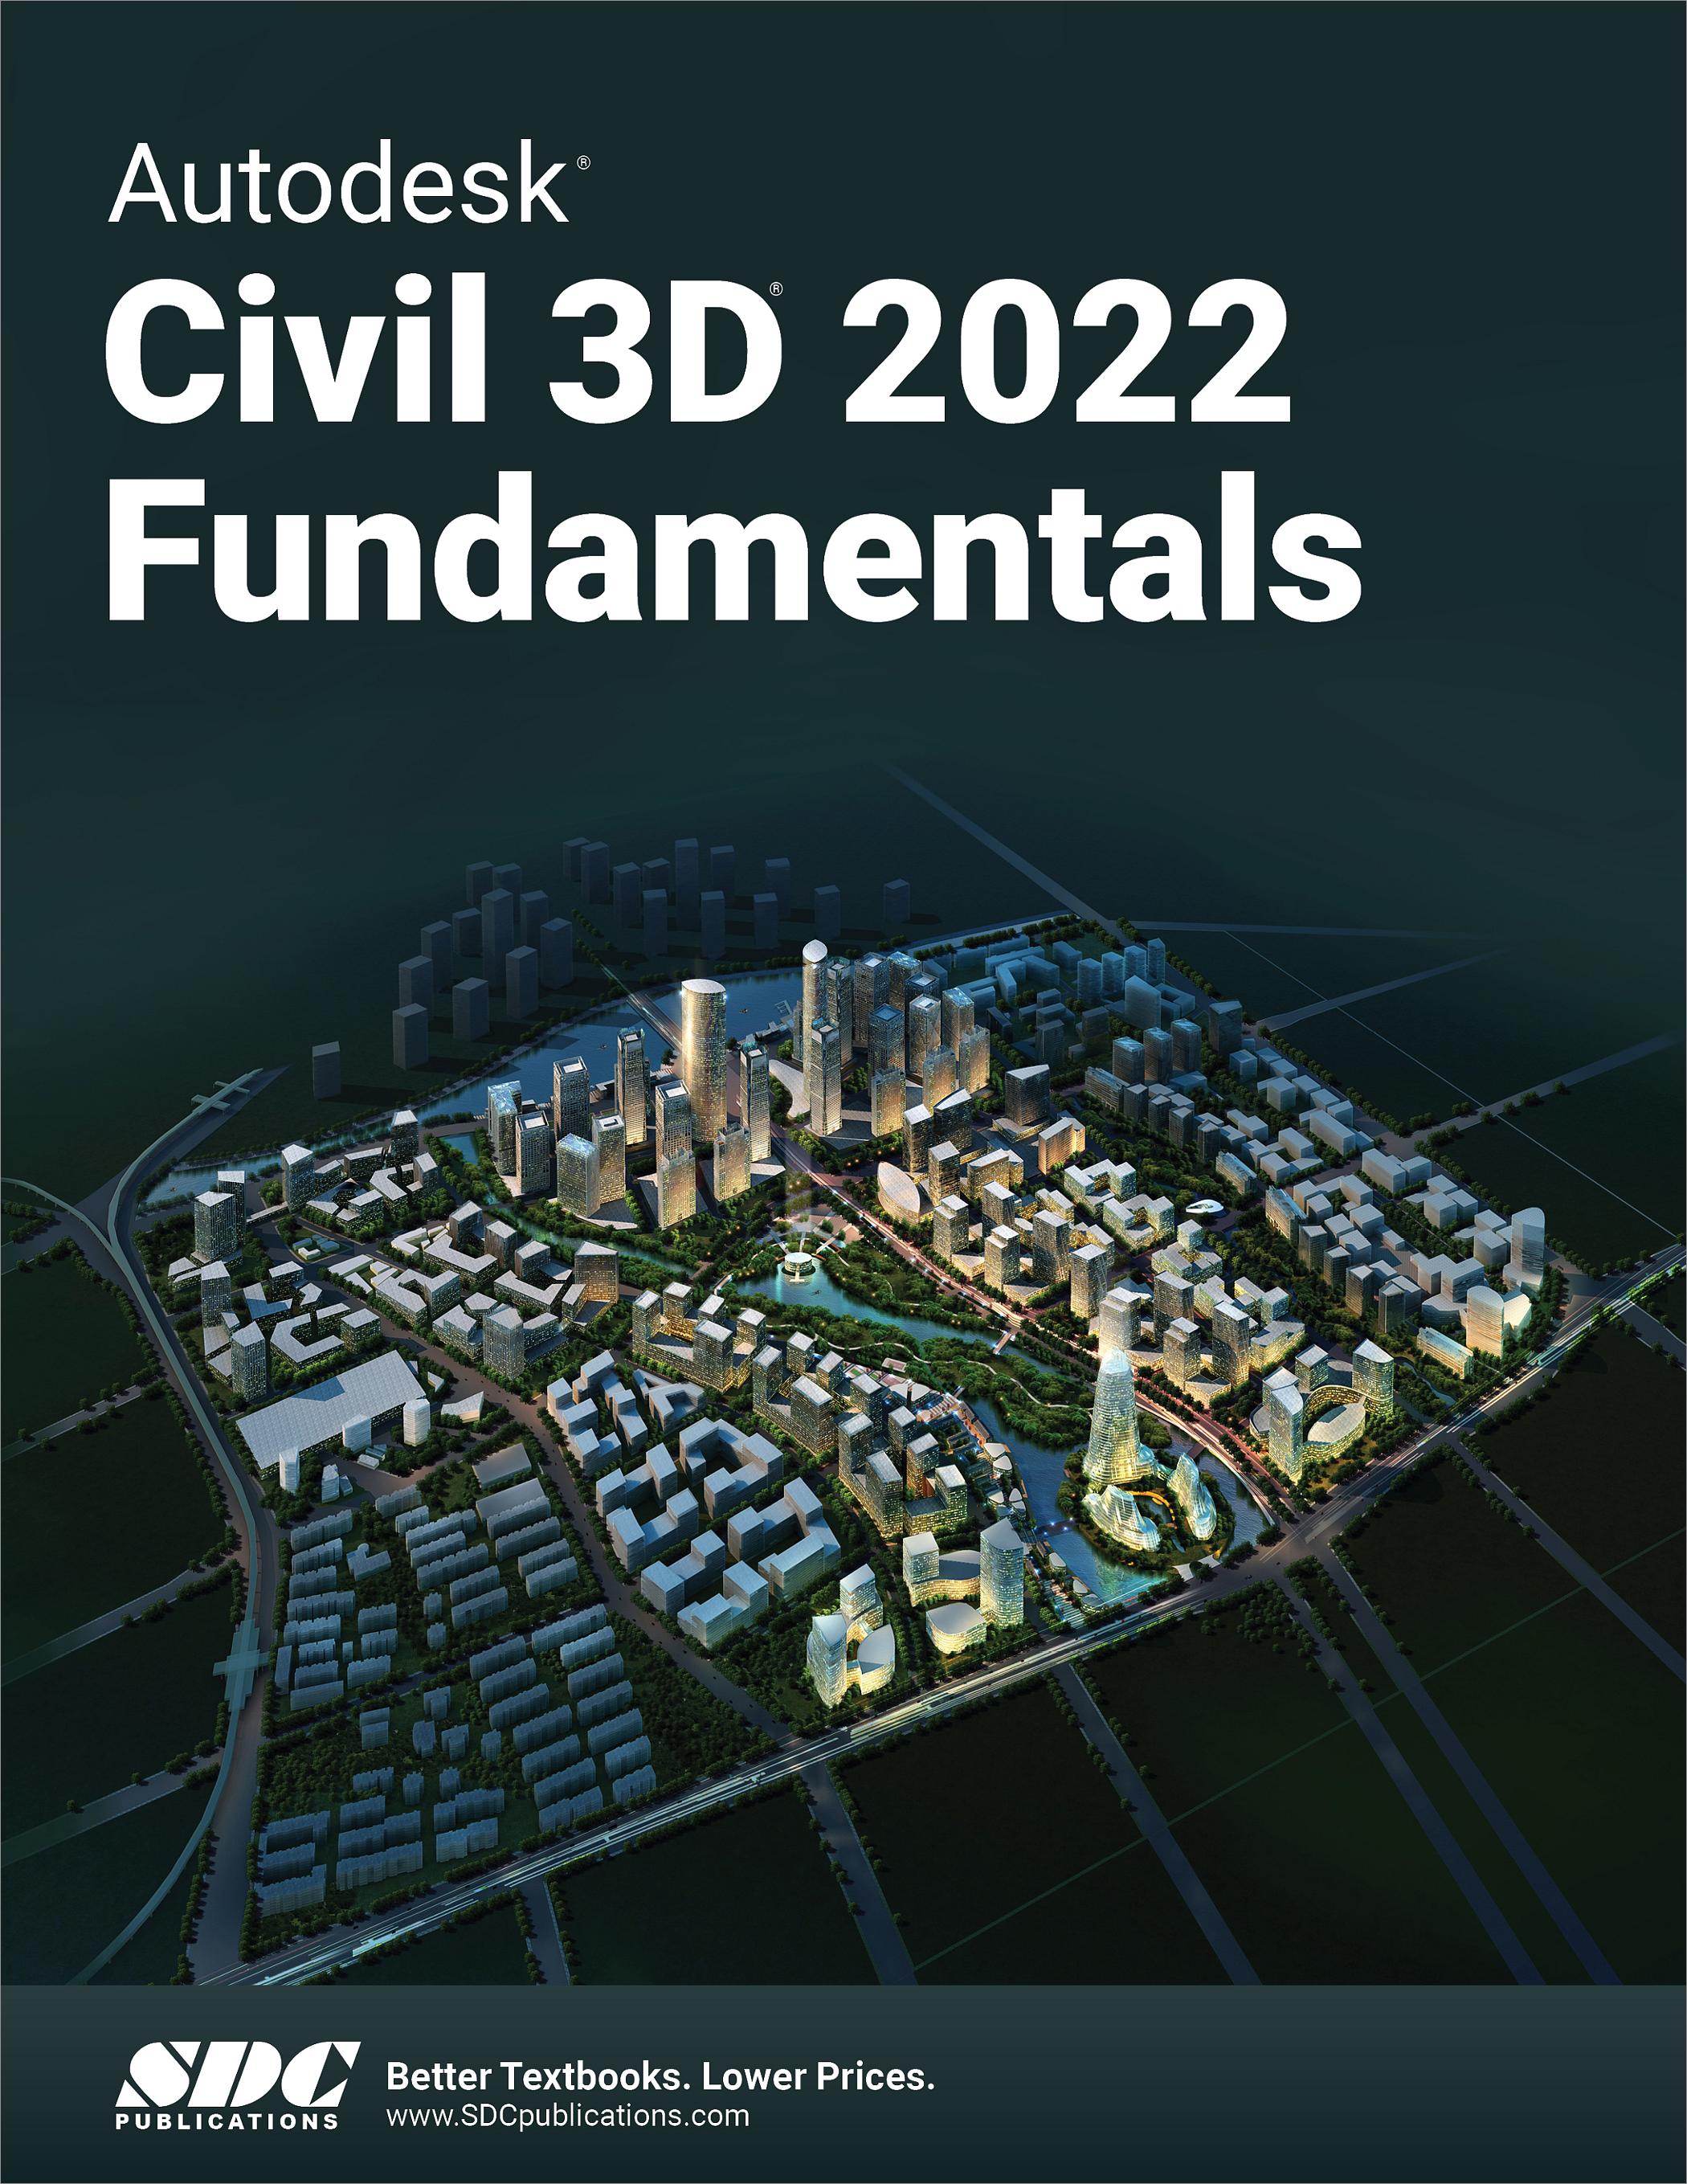 what autodesk software works with civil 3d